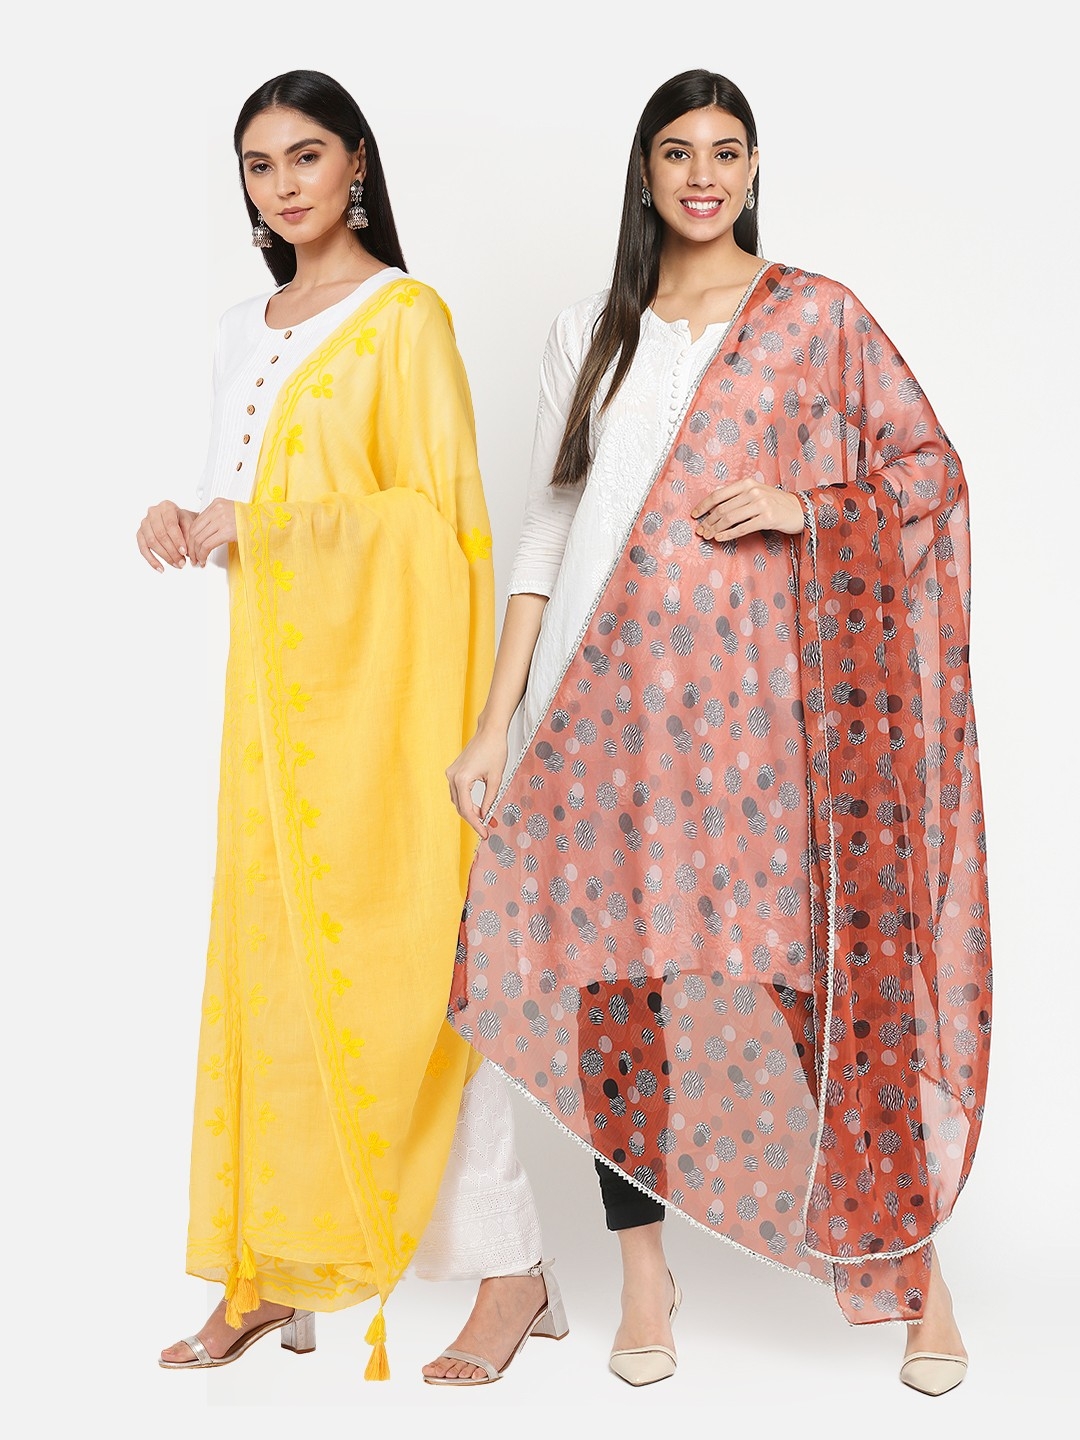 Get Wrapped | Get Wrapped Embroidered & Digital Printed Dupatta Combo for Women - Pack of 2 0